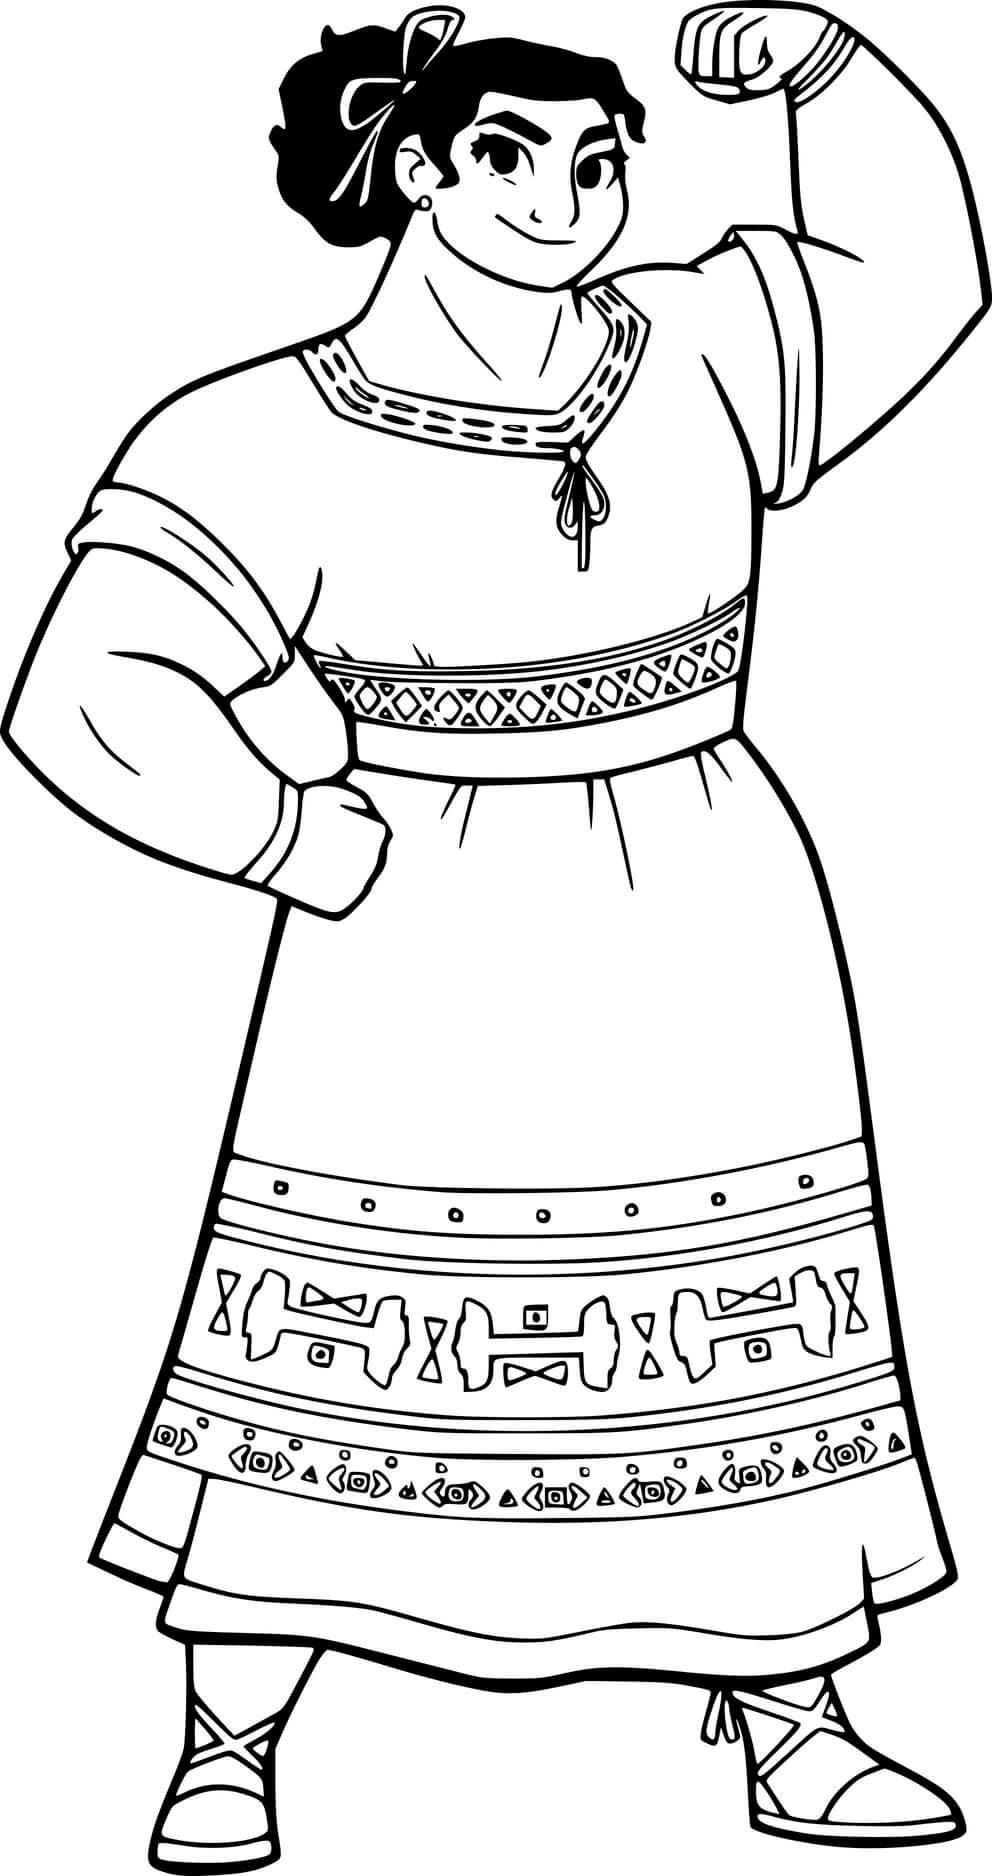 Encanto Strong Luisa Madrigal Coloring Page